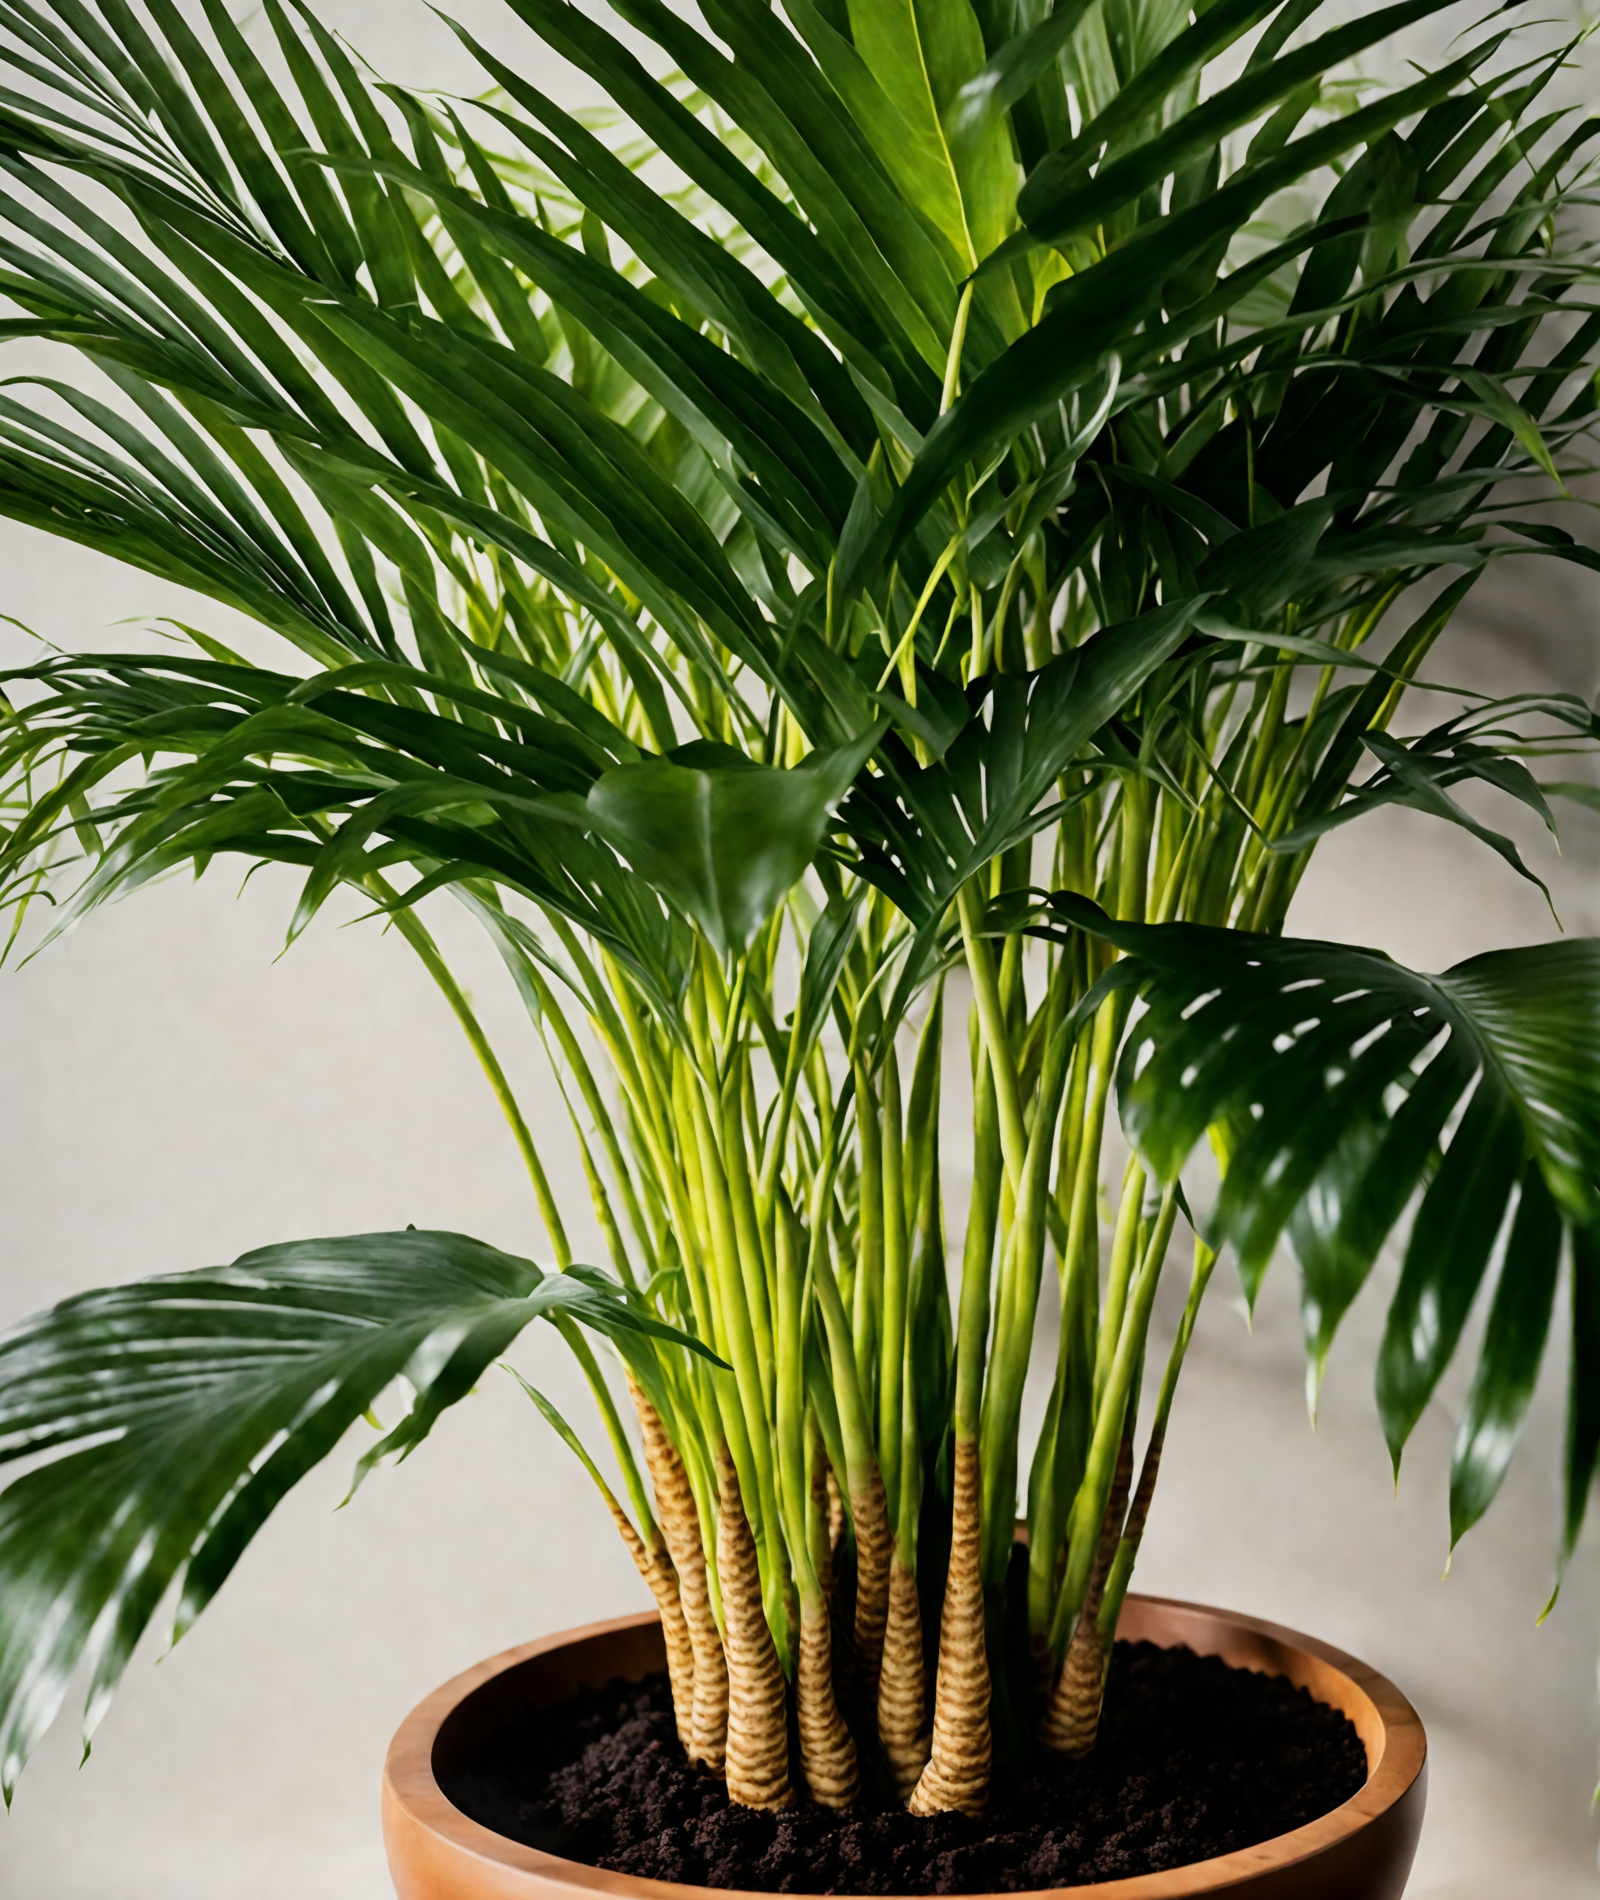 Dypsis lutescens in a planter with bananas in a bowl beside it, clear lighting, dark background.